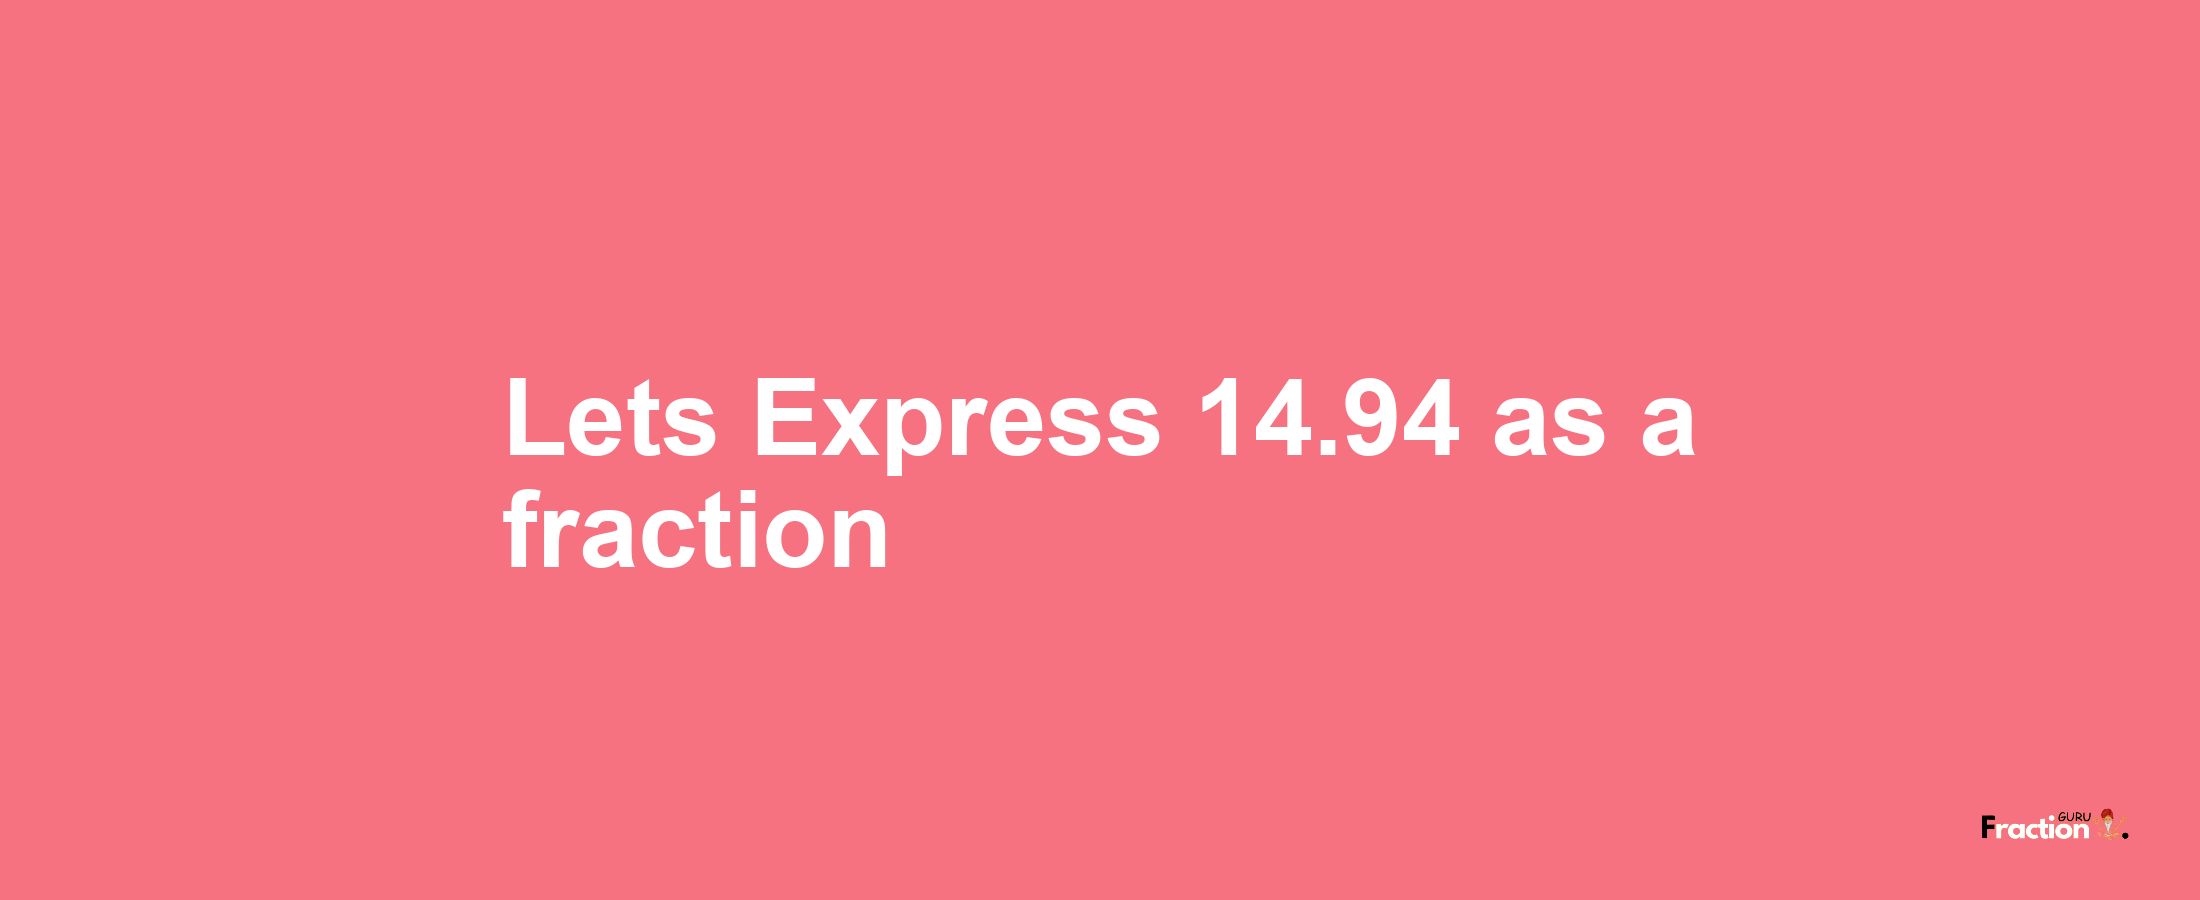 Lets Express 14.94 as afraction